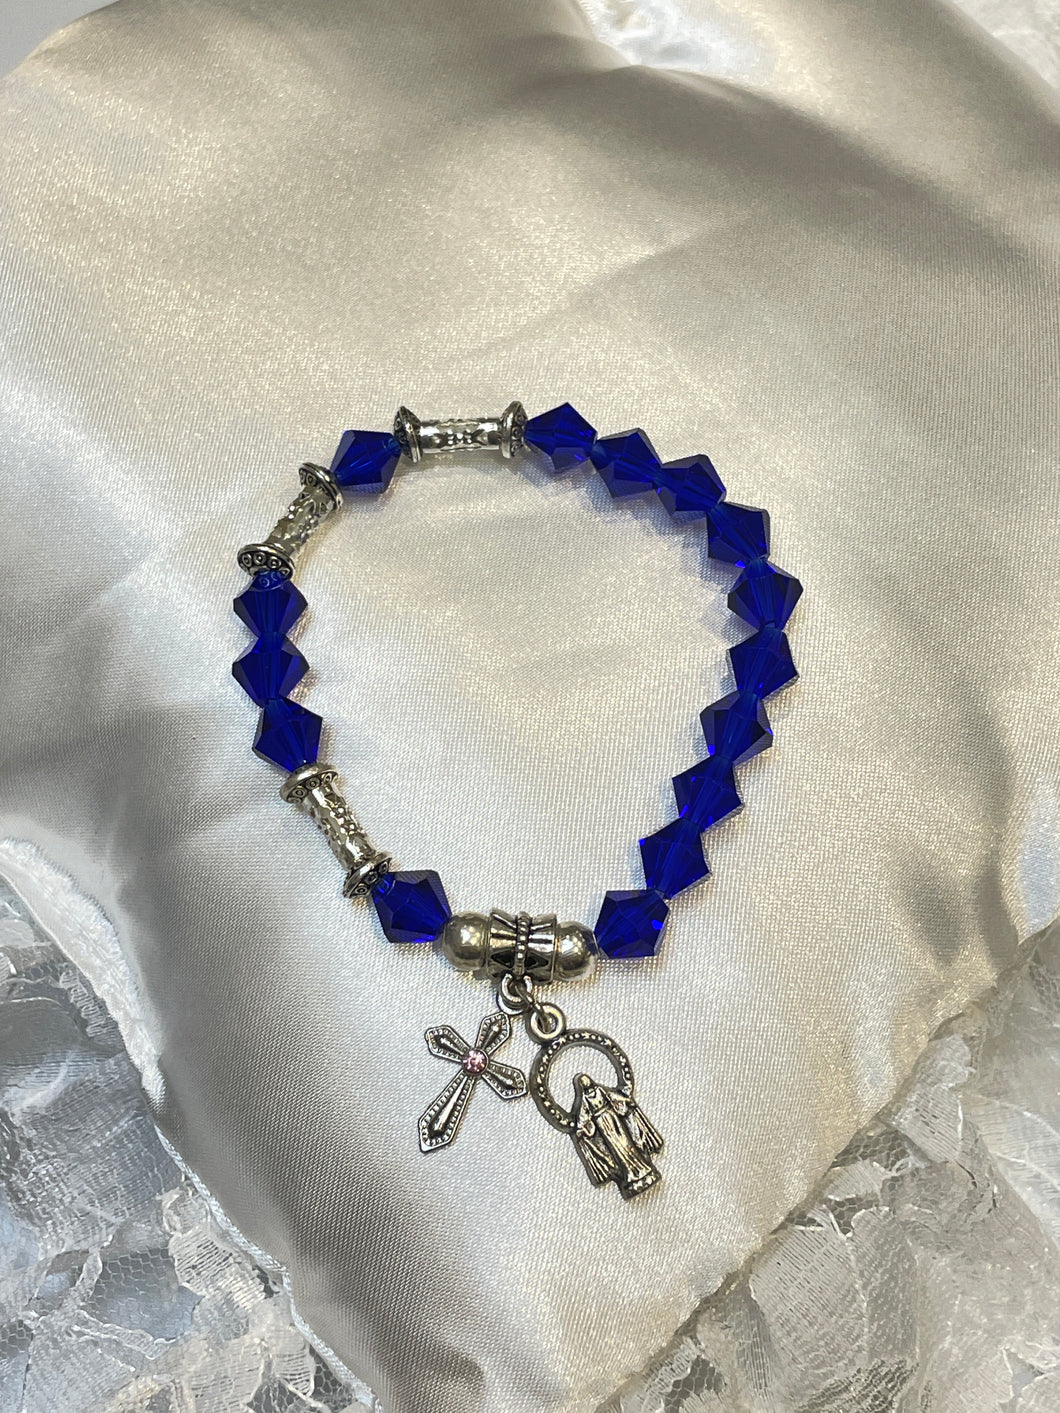 Navy Blue Crystal Rosary Bracelet with Our Lady of Grace and Cross Charms